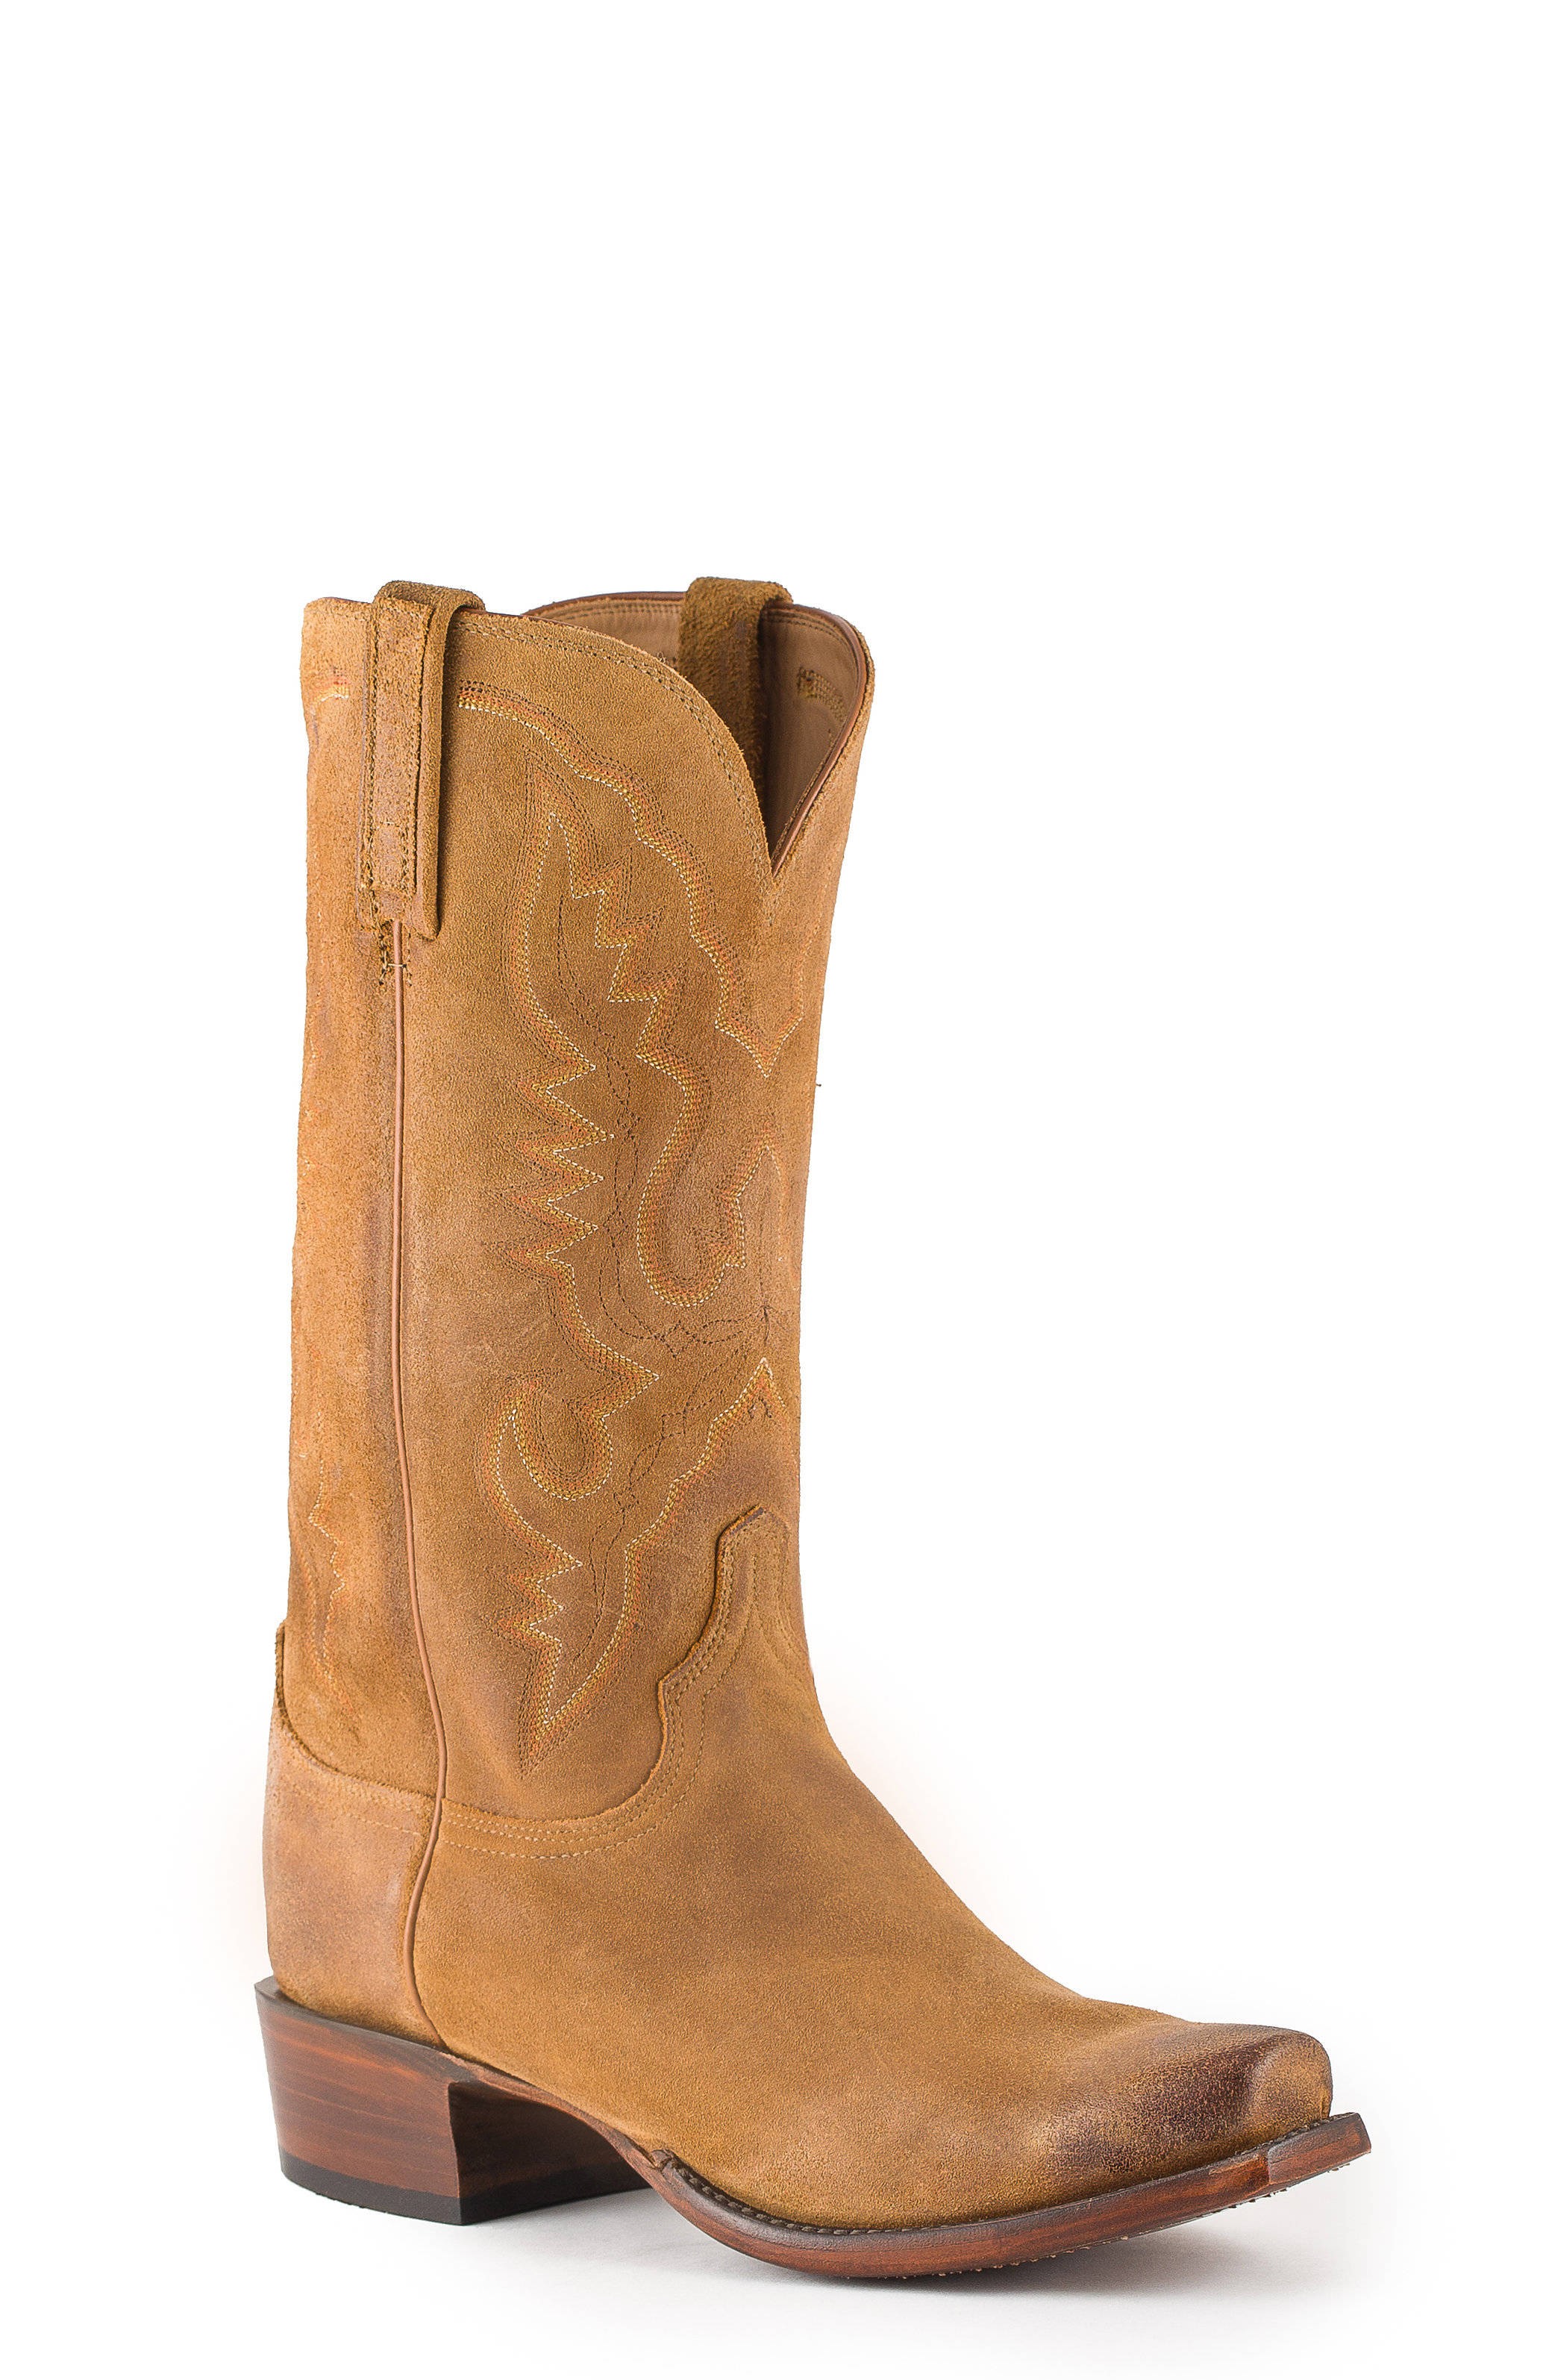 HL1500 | Allens Boots | Men's Lucchese